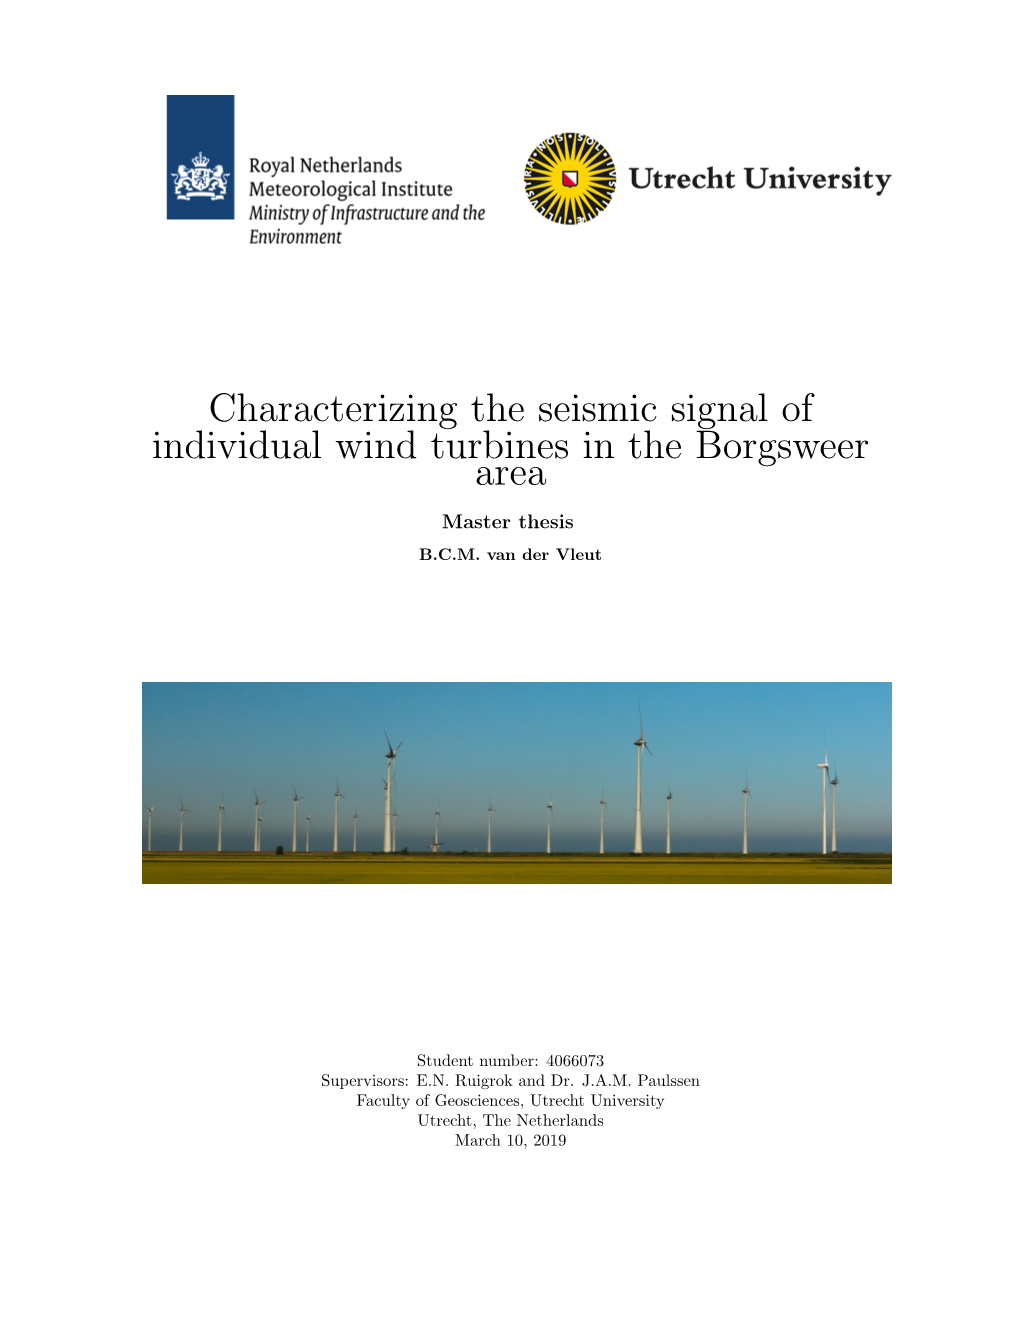 Characterizing the Seismic Signal of Individual Wind Turbines in the Borgsweer Area Master Thesis B.C.M